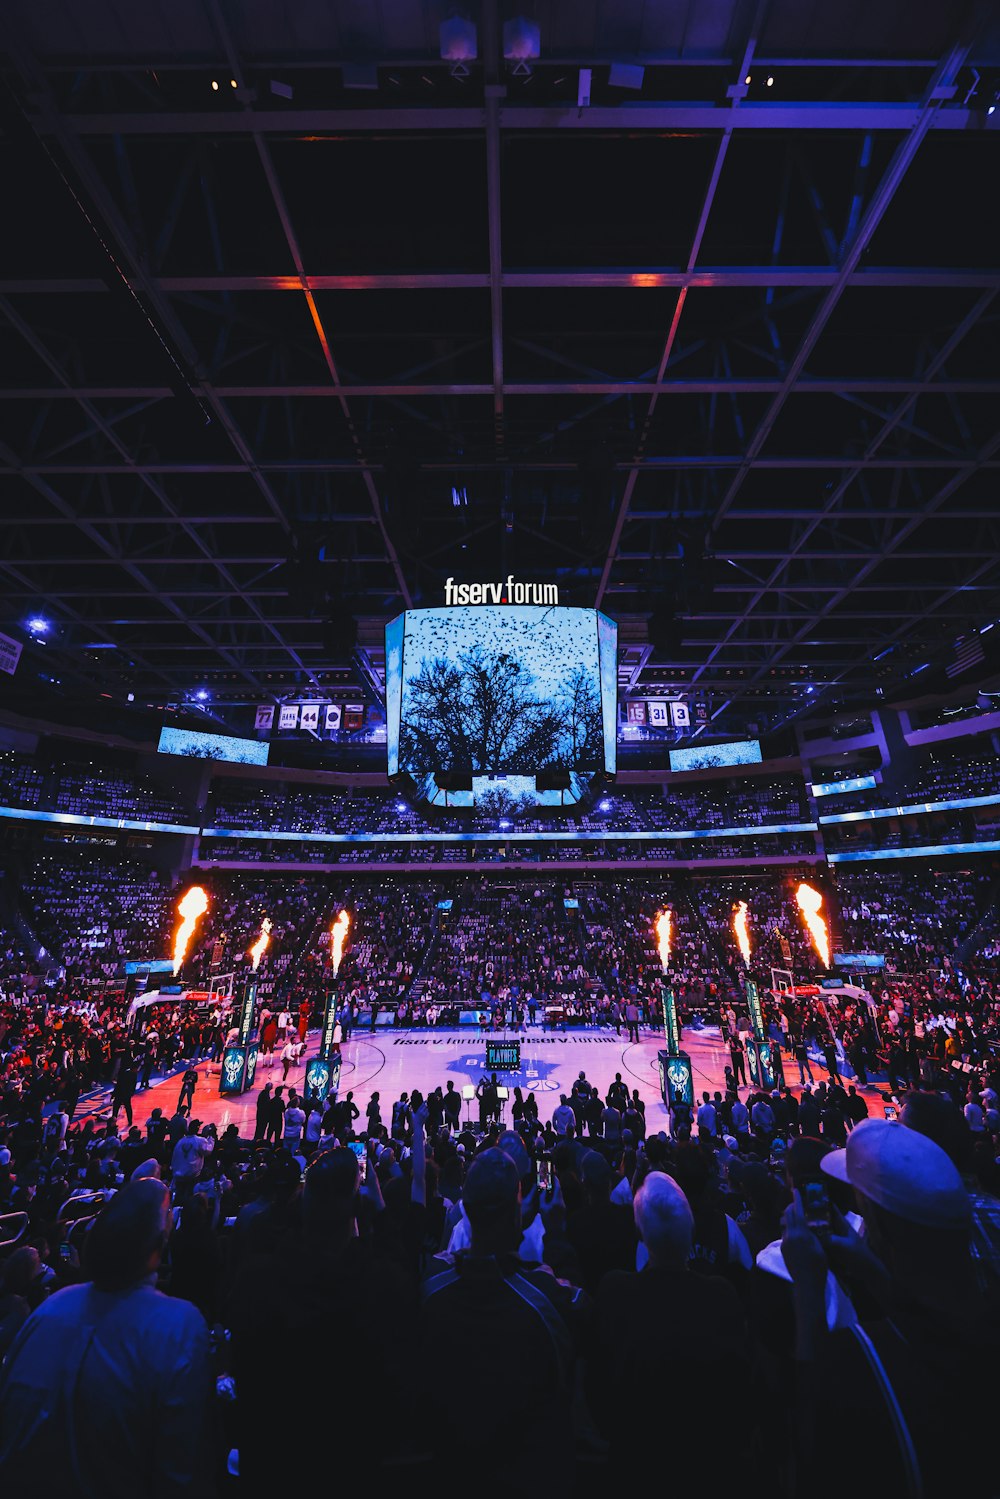 Basketball Game Pictures  Download Free Images on Unsplash